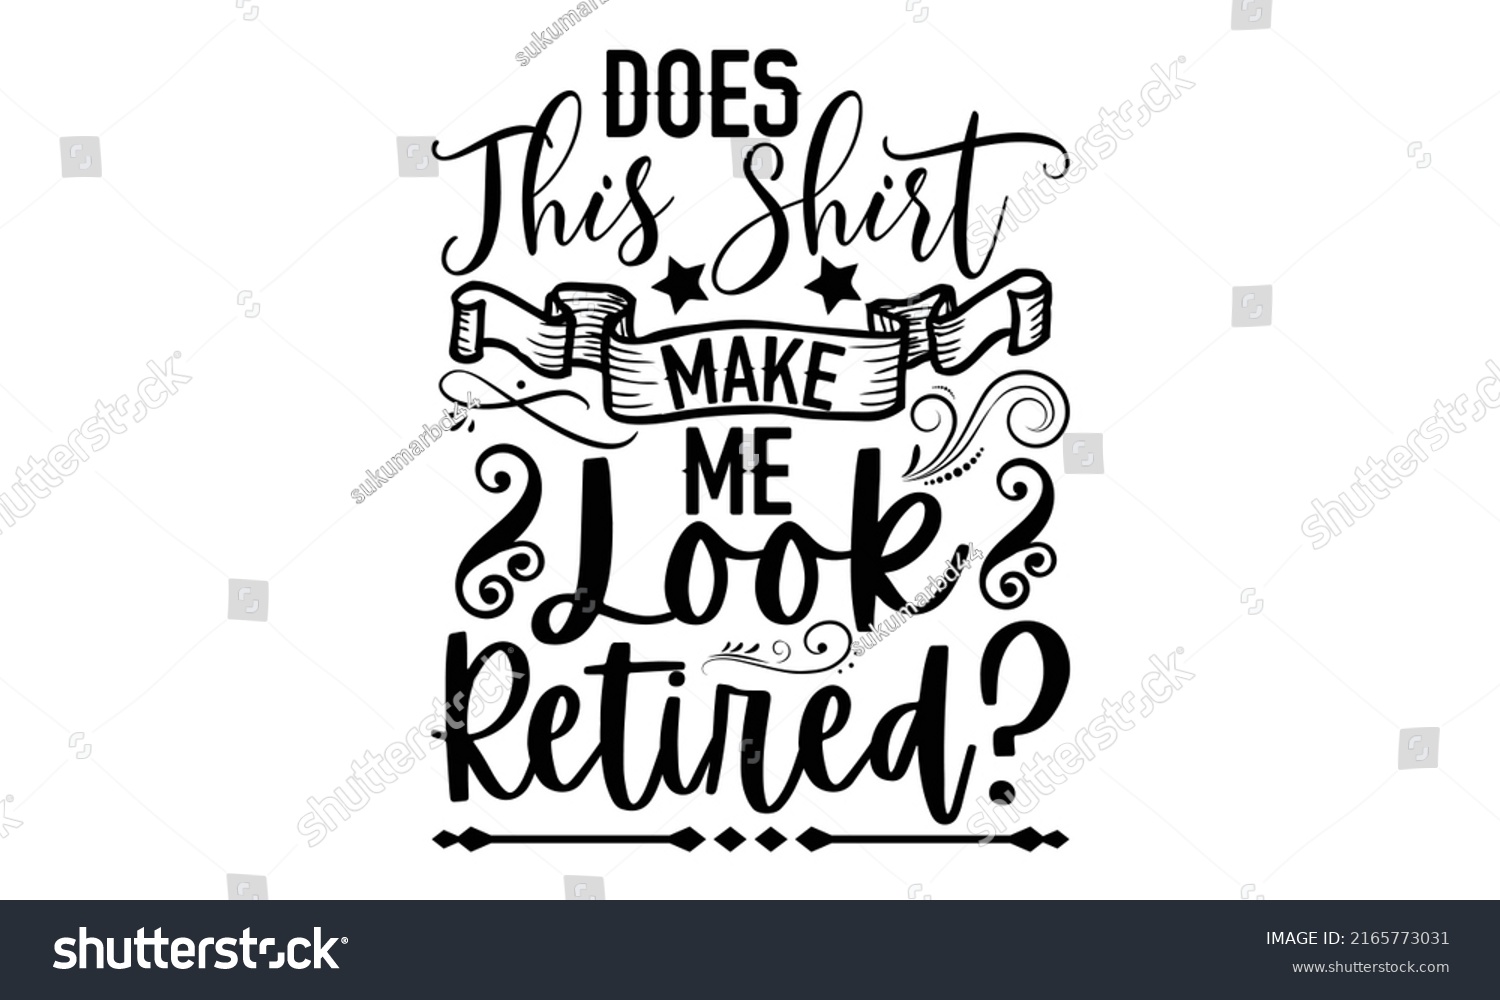 SVG of Does This Shirt Make Me Look Retired? - Retirement t shirt design, Hand drawn lettering phrase, Calligraphy graphic design, SVG Files for Cutting Cricut and Silhouette svg